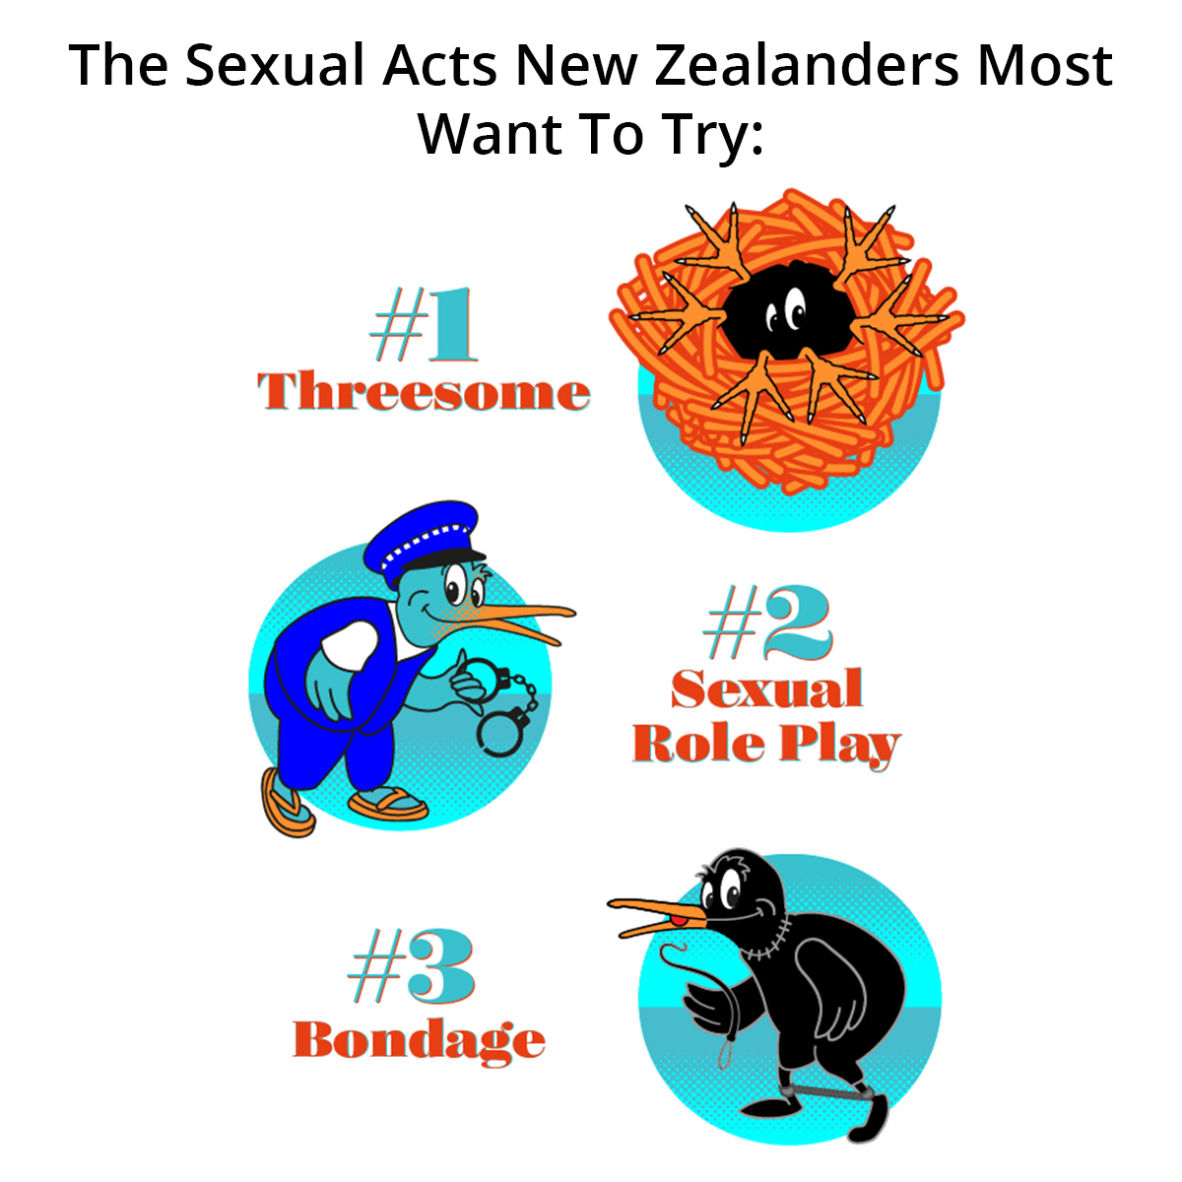 sex acts kiwis most want to try KSS